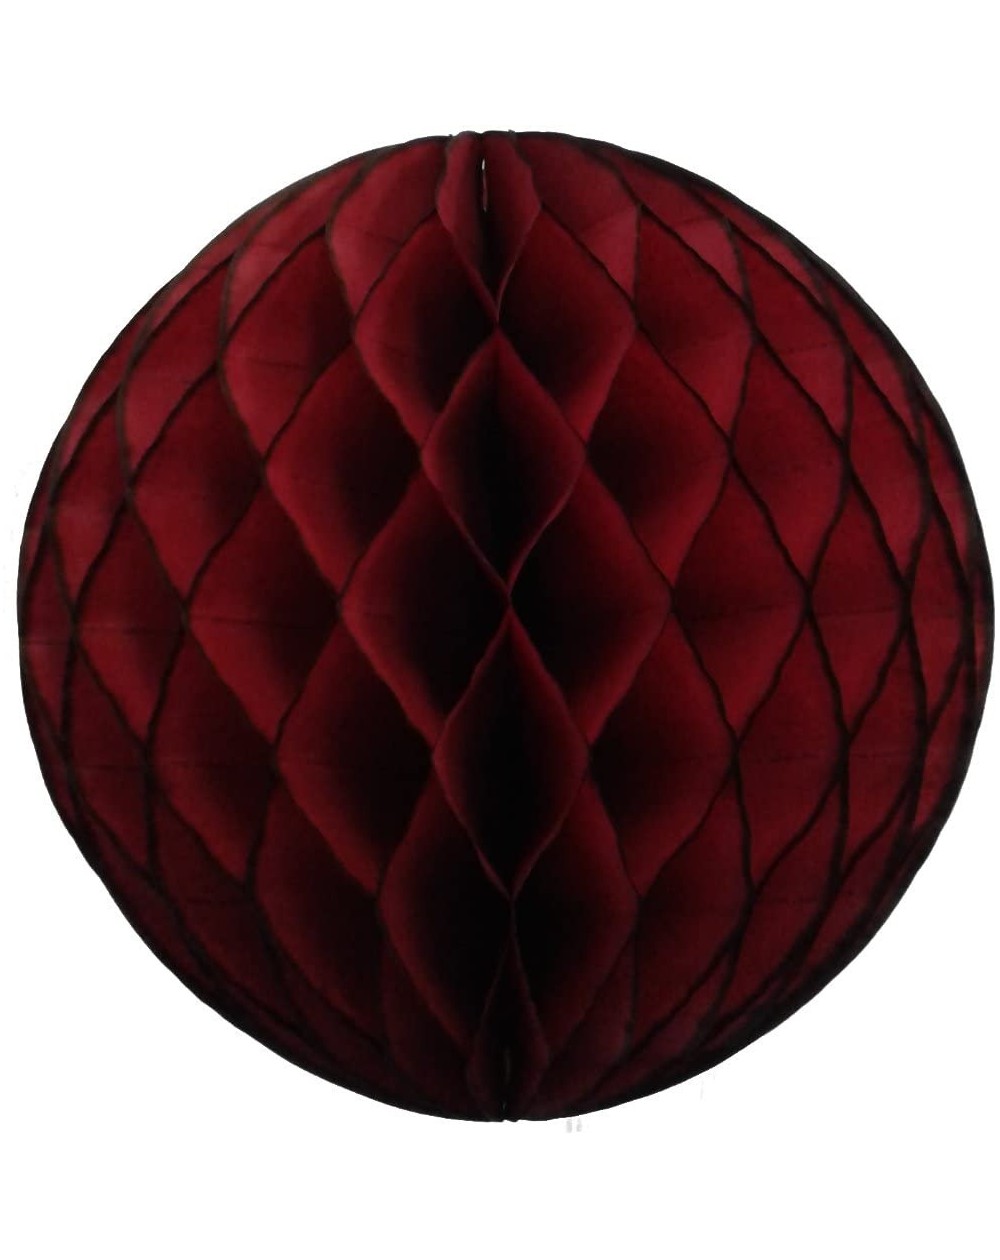 Tissue Pom Poms 3-Pack Large 14 Inch Honeycomb Tissue Paper Party Ball Decoration (Maroon) - Maroon - CO17X3KD73I $12.25